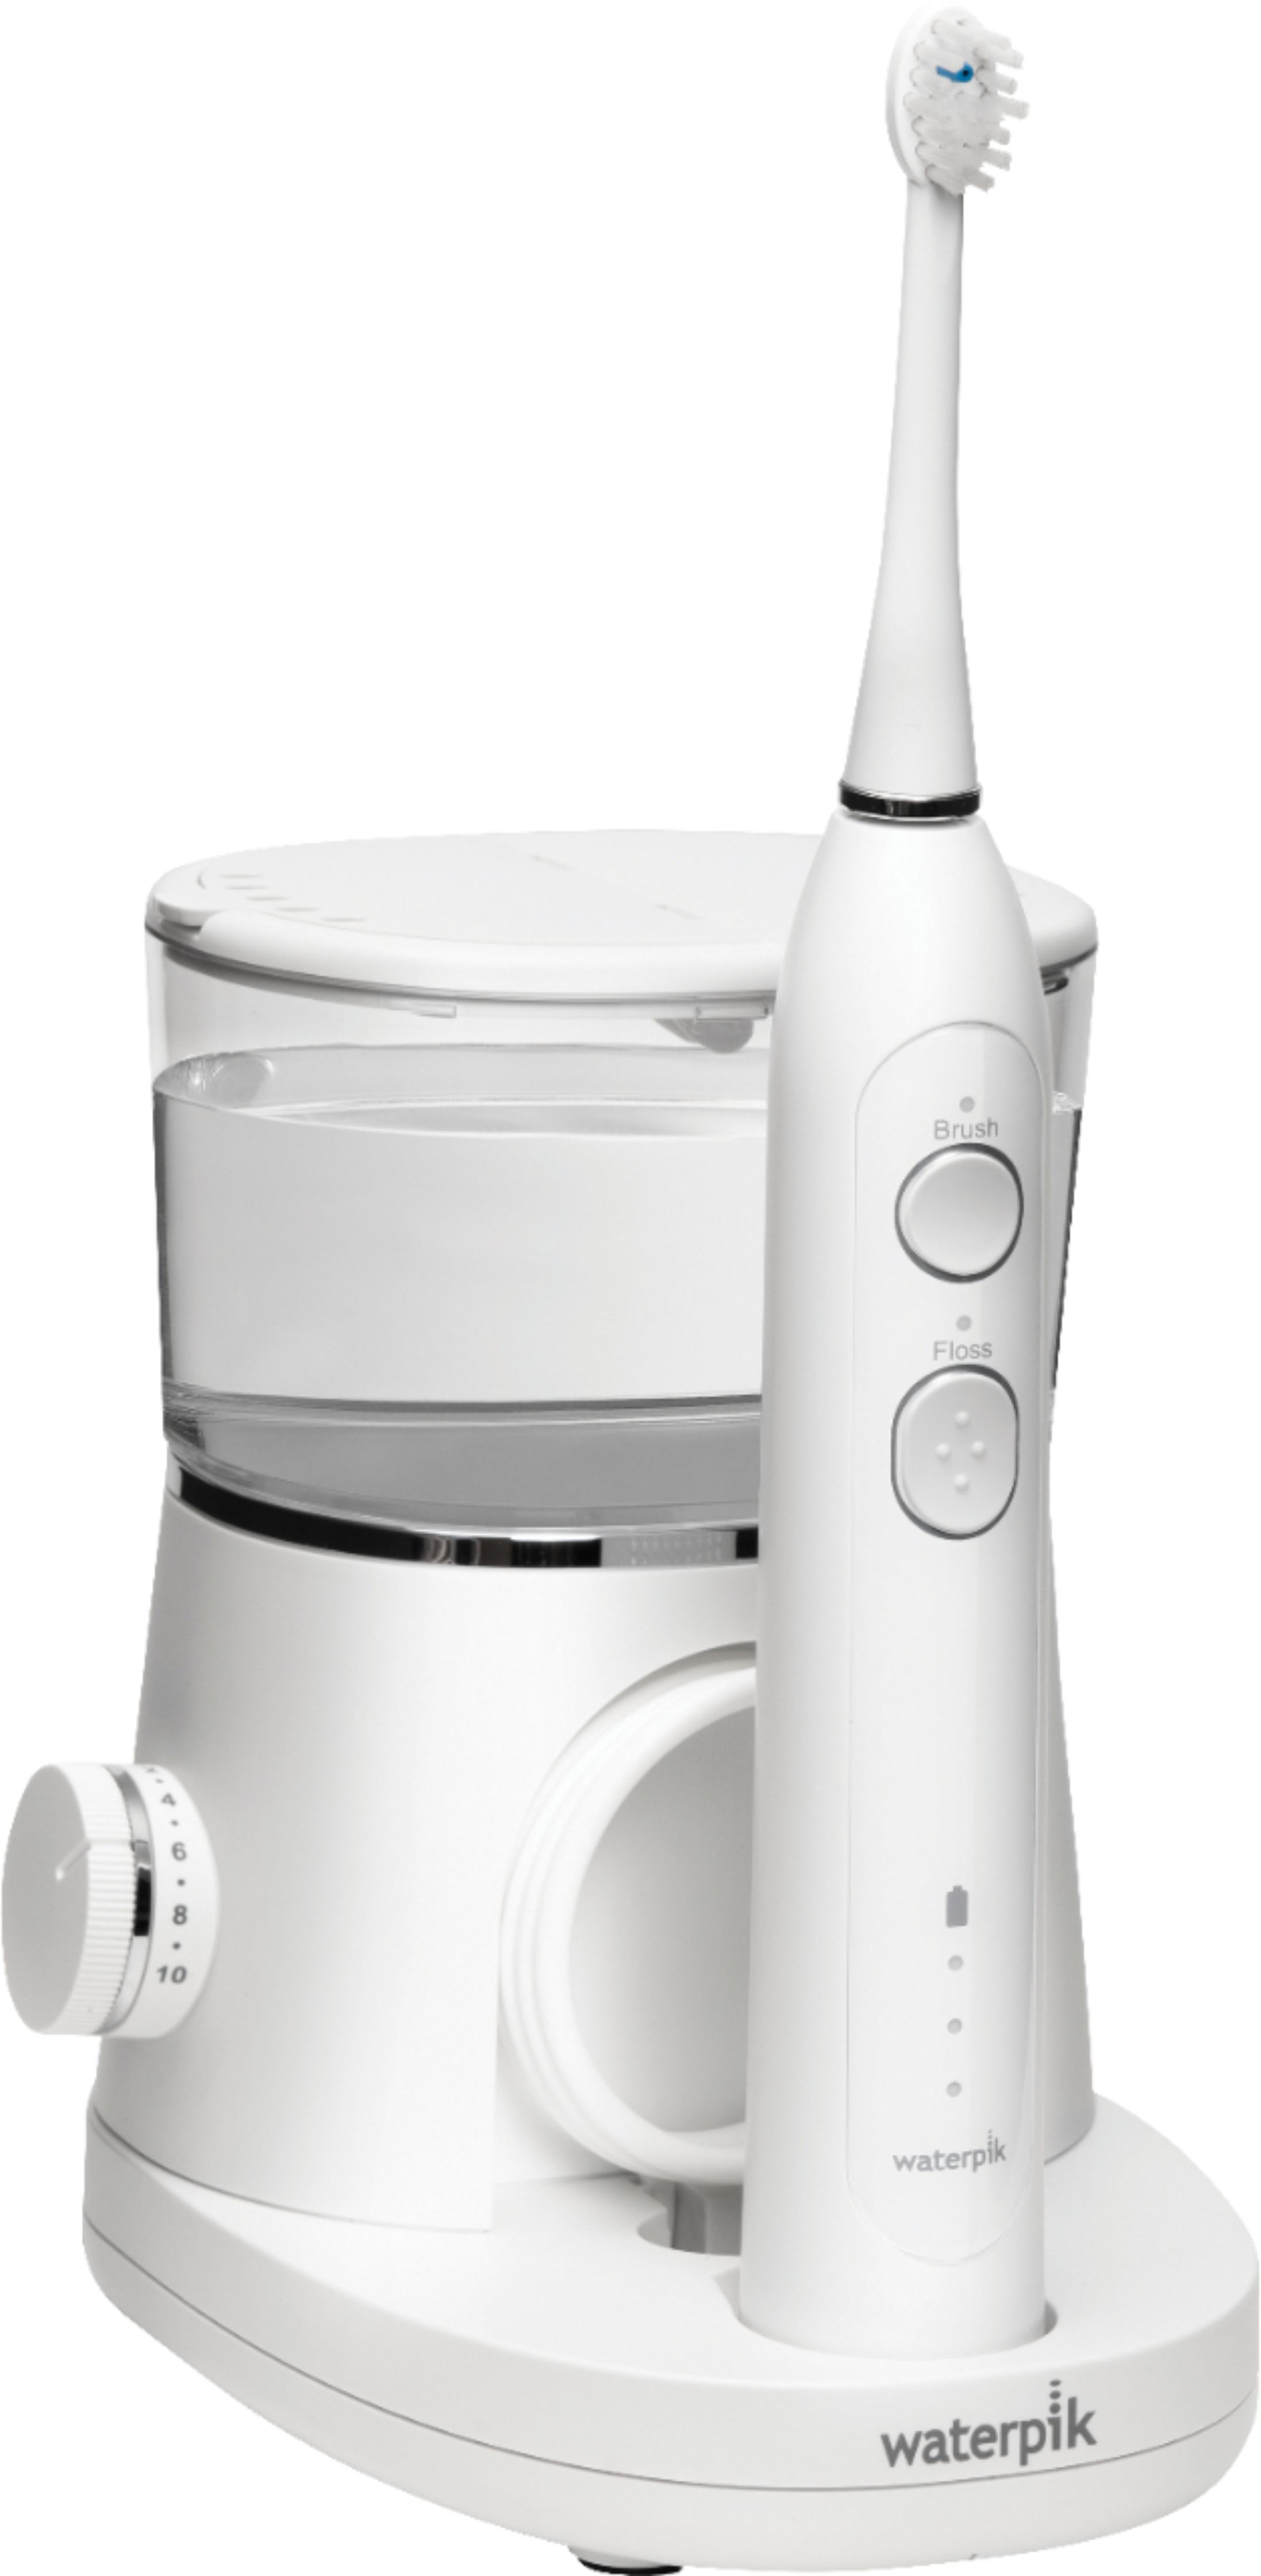 Waterpik - Water Pik Sonic-Fusion Rechargeable Toothbrush and Oral Irrigator - White/Chrome